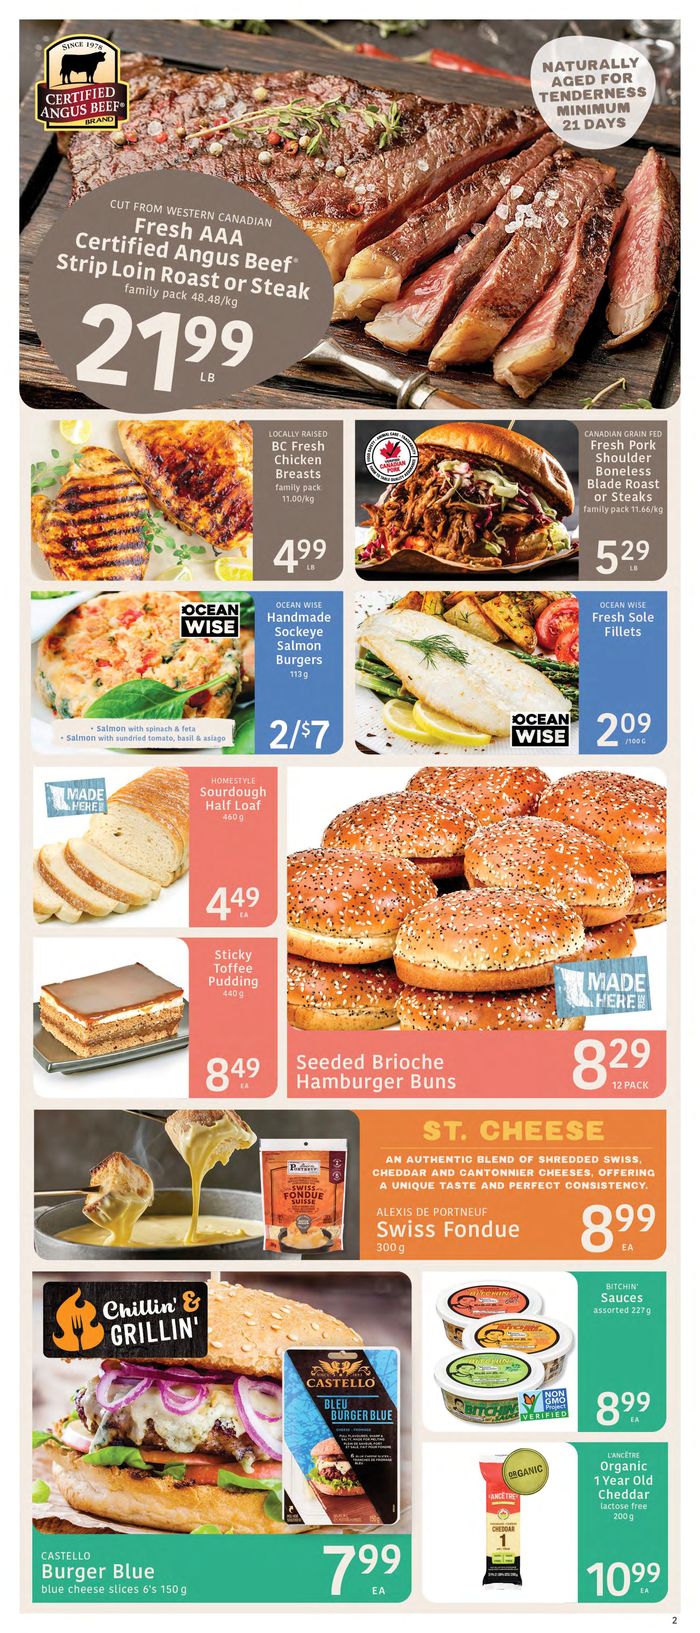 Fresh St Market catalogue in Vancouver | Fresh St Market Weekly Special | 2024-05-10 - 2024-05-24